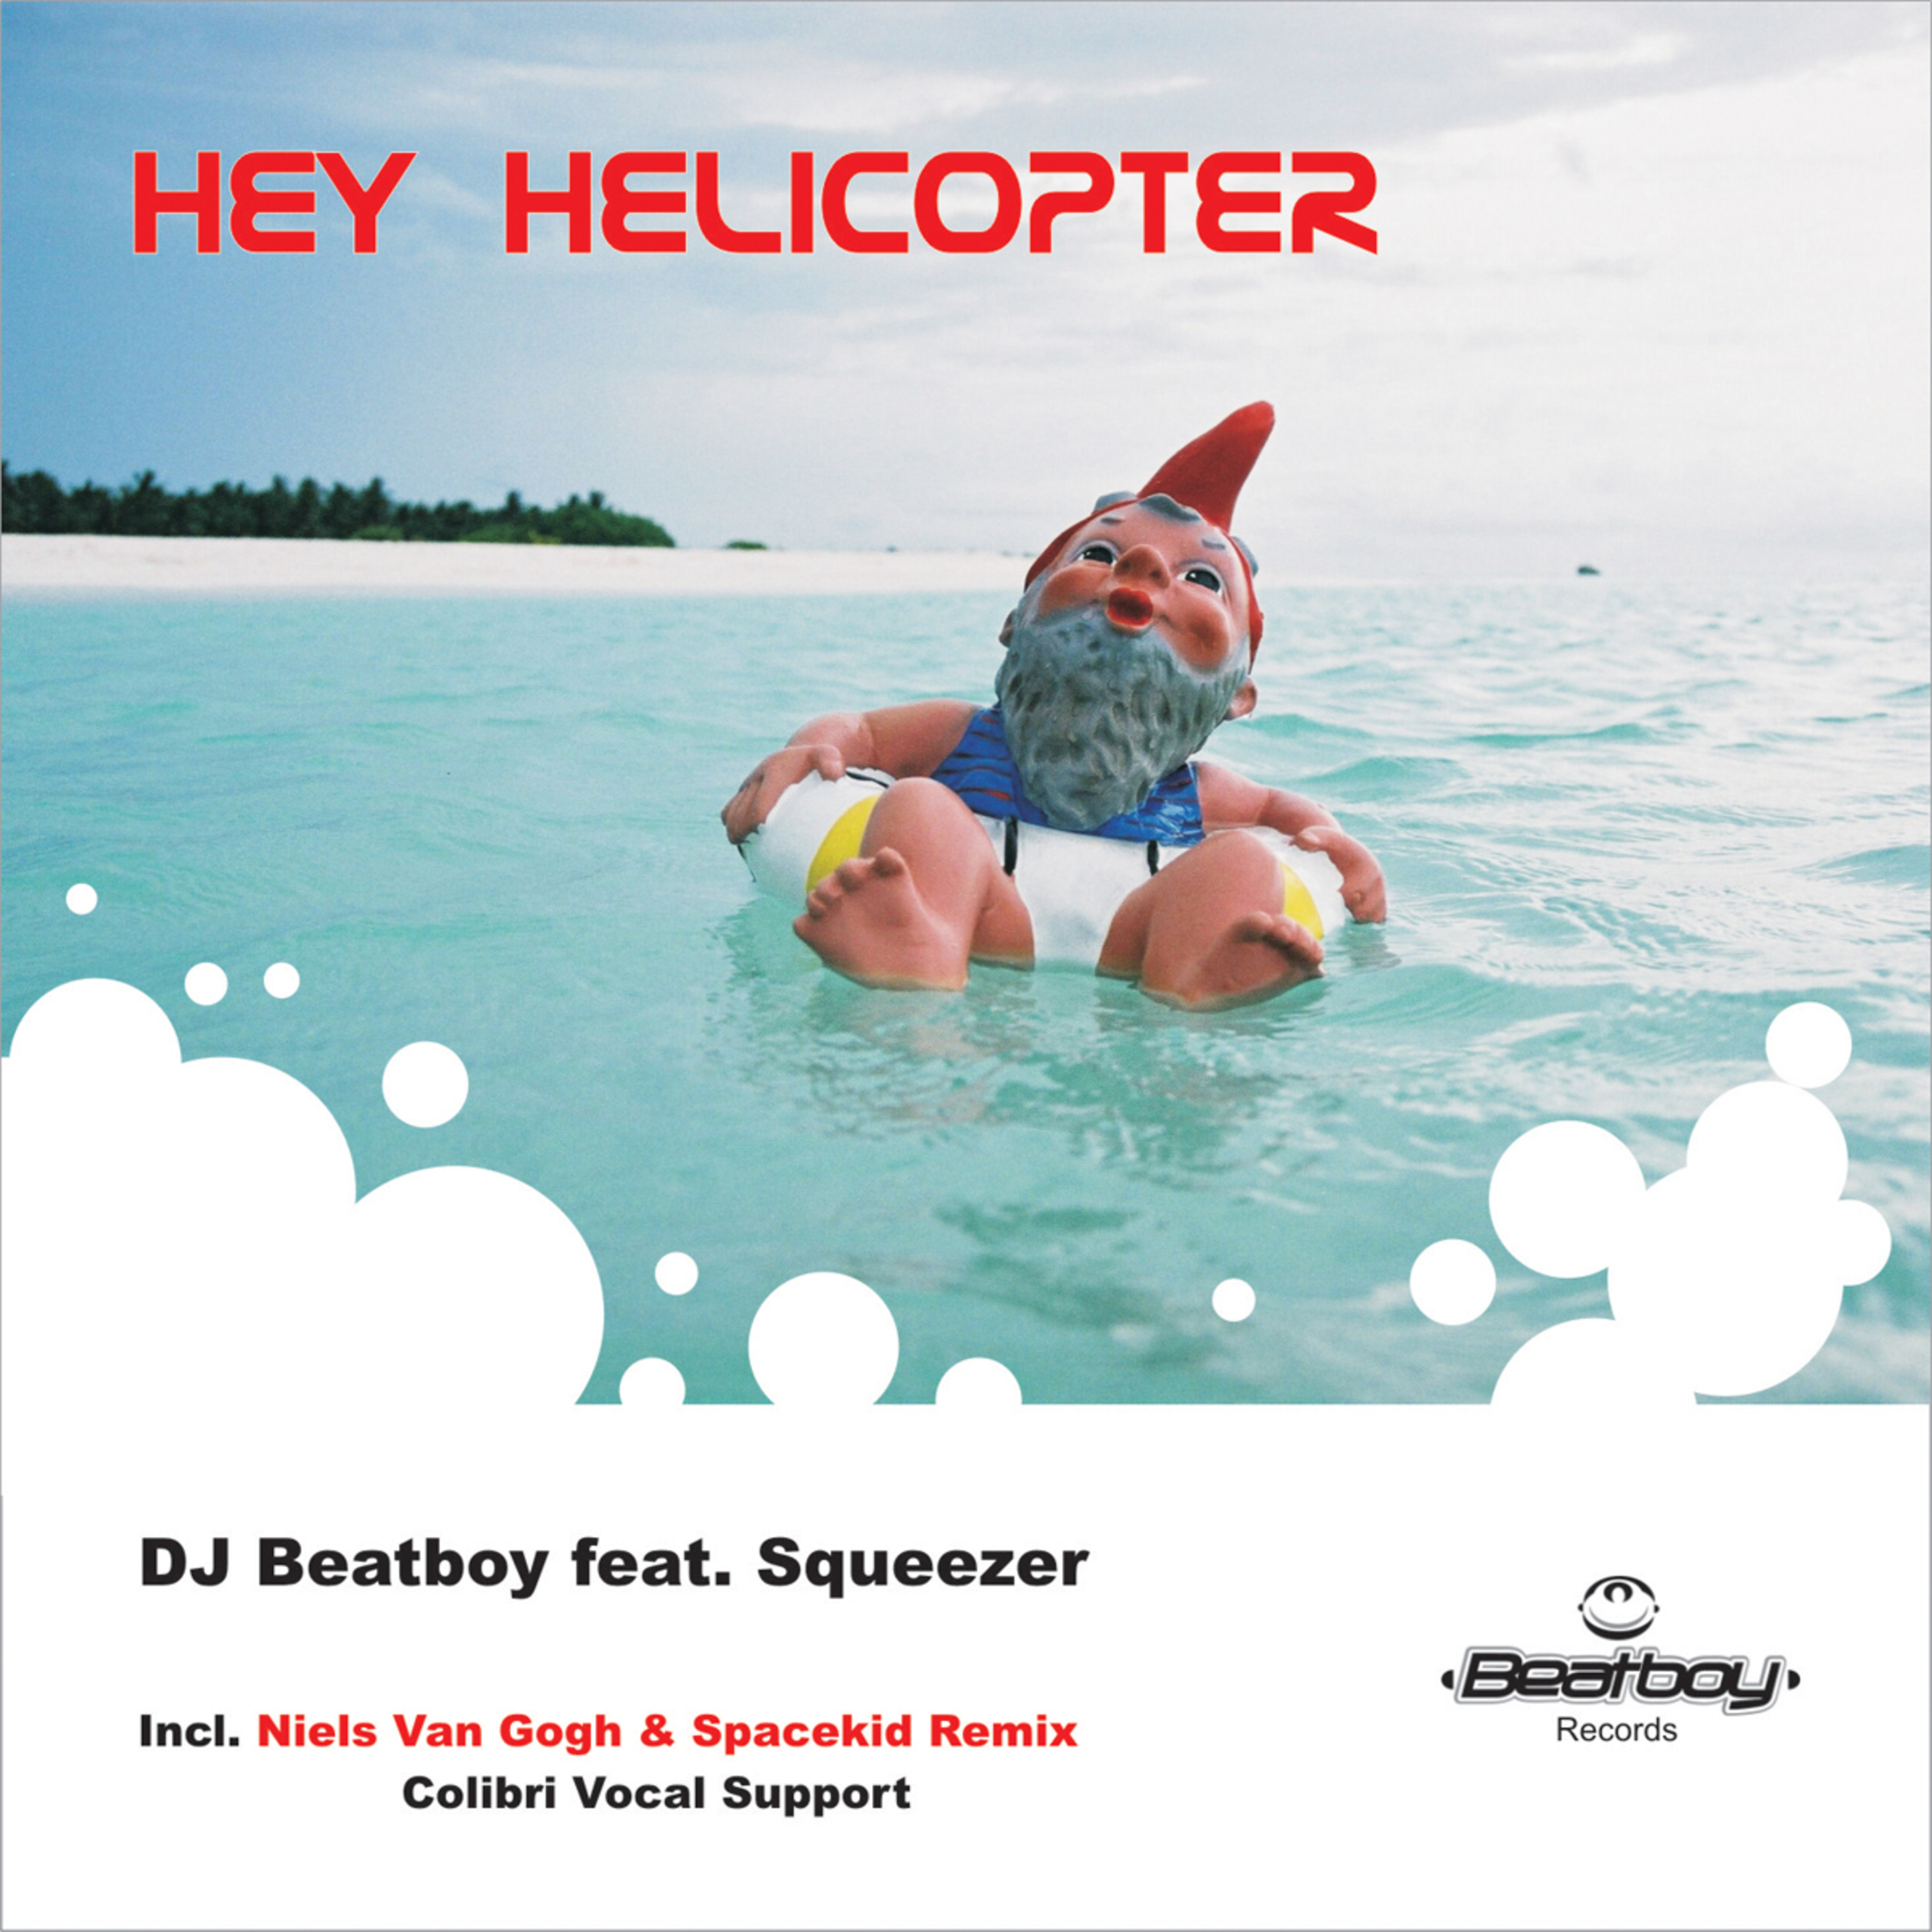 Hey Helicopter (Party Mix)